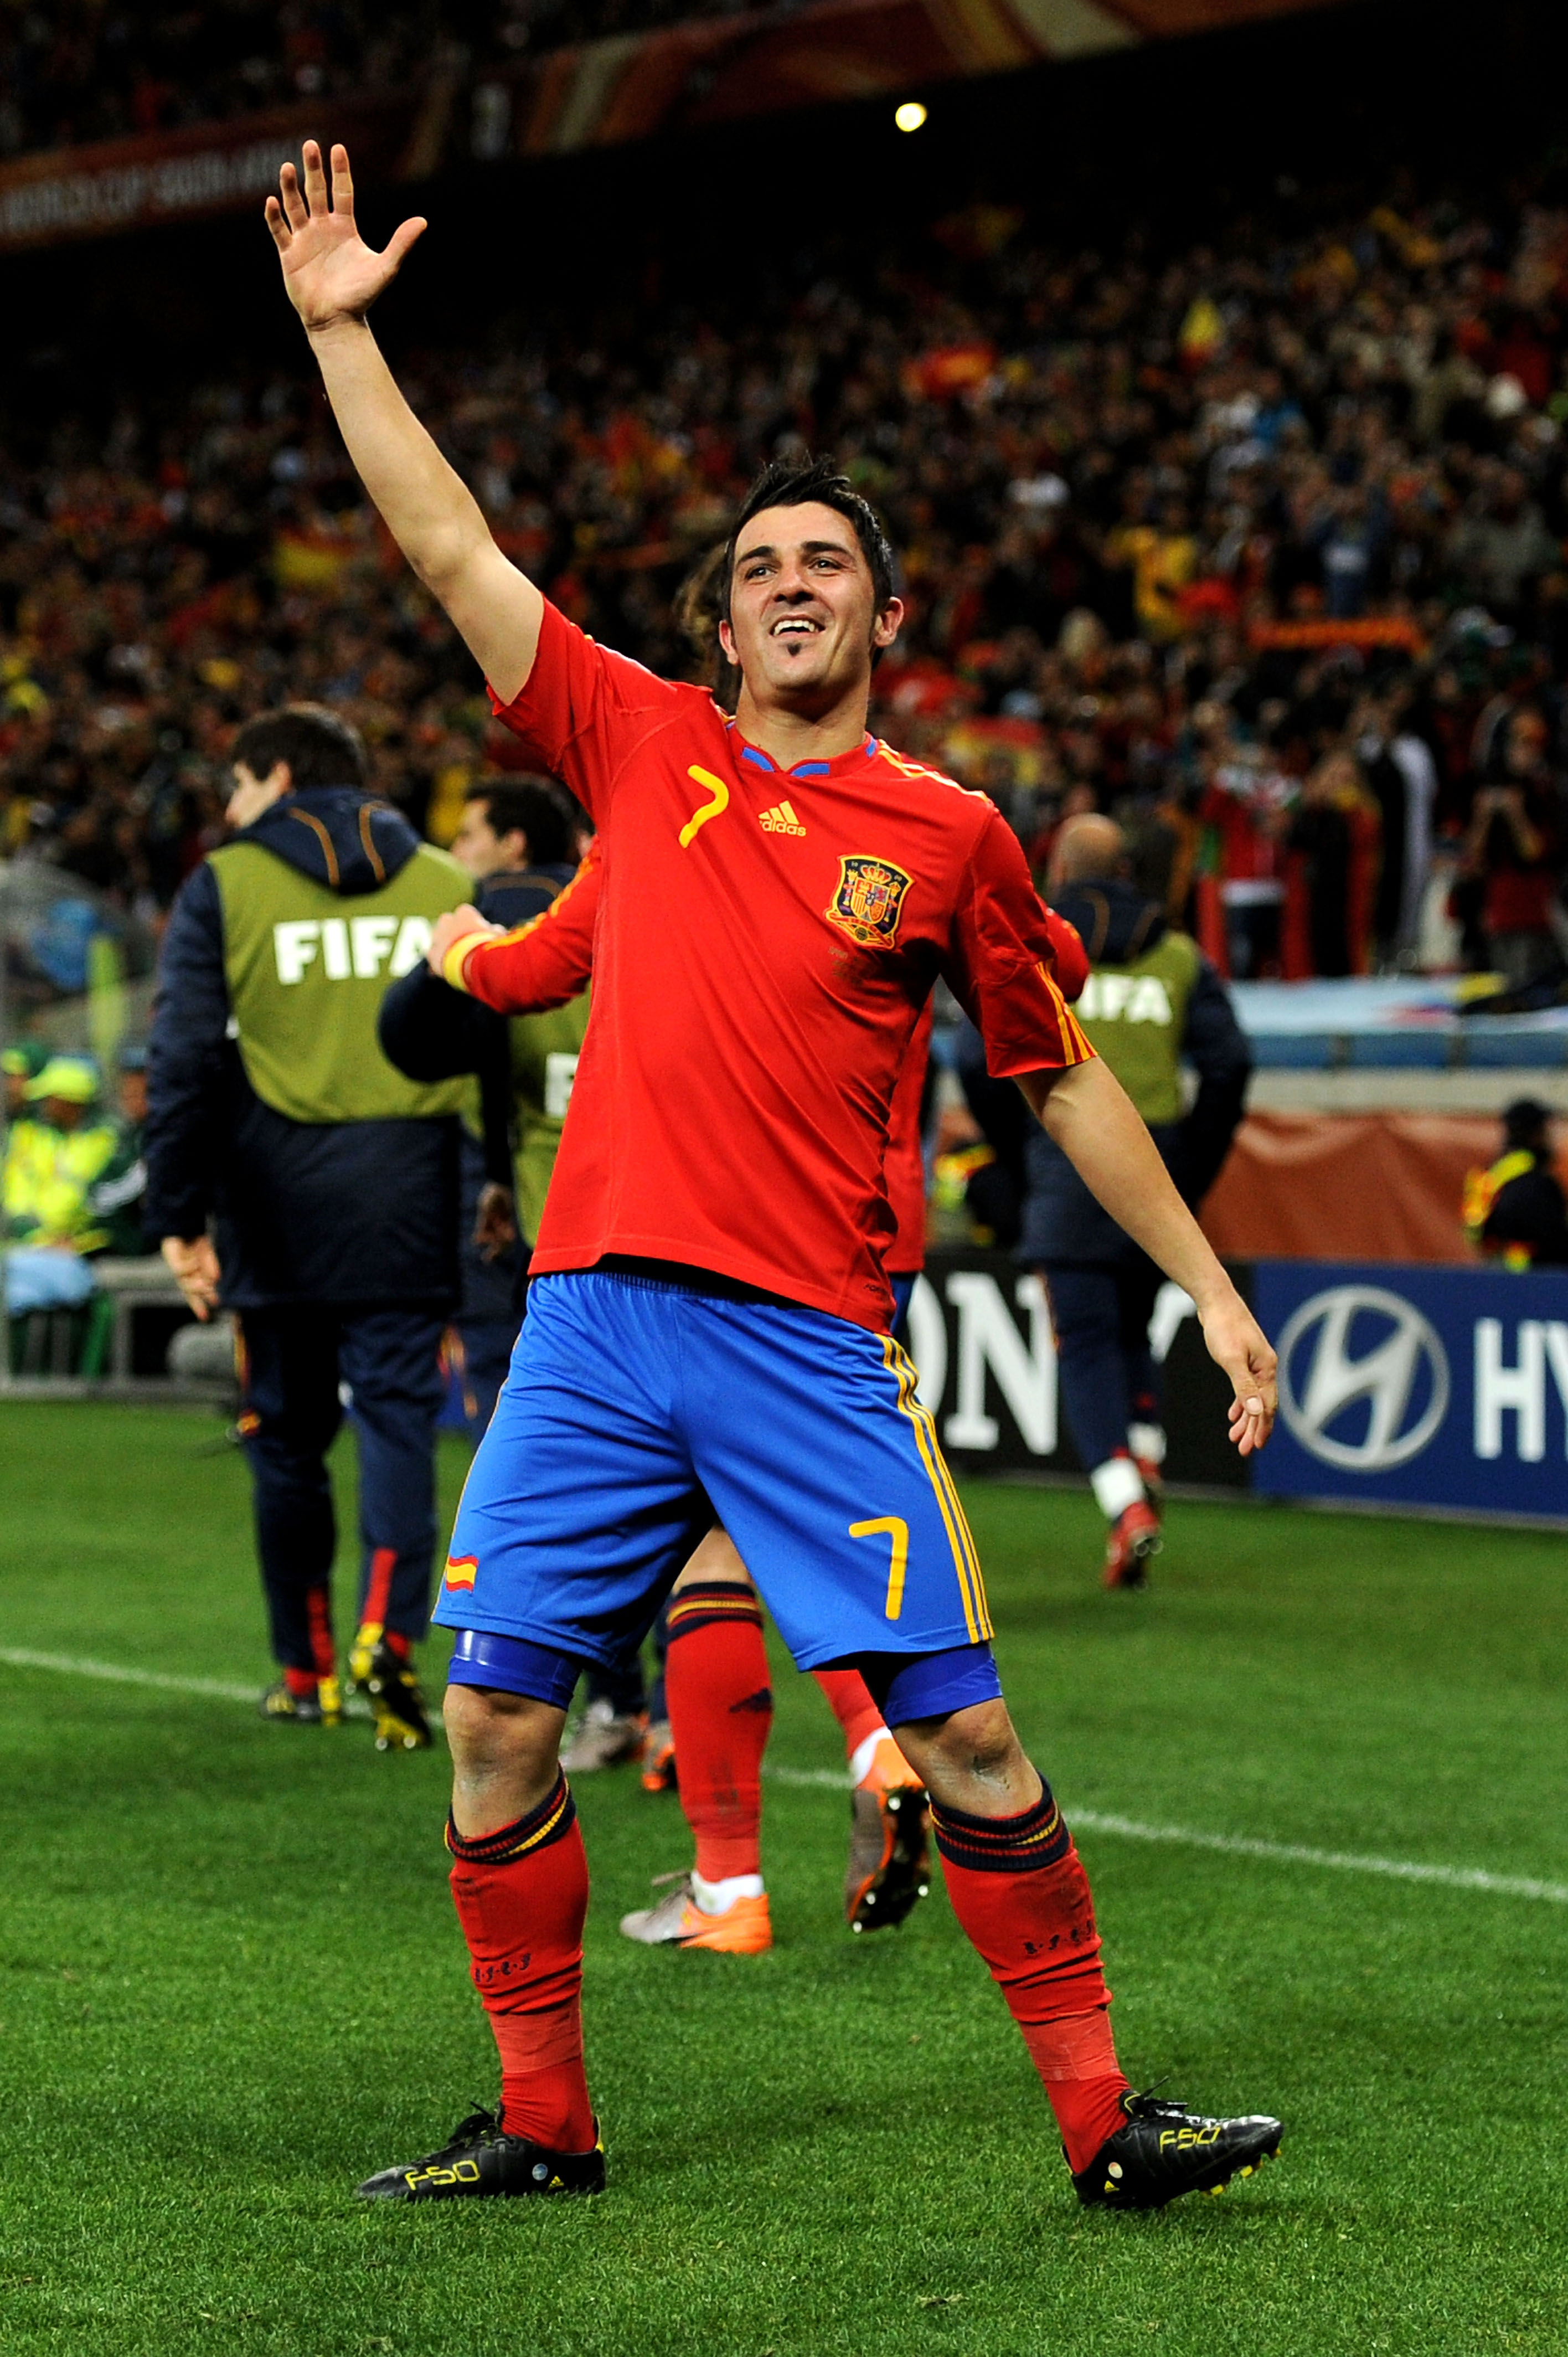 CAPE TOWN, SOUTH AFRICA - JUNE 29:  David Villa of Spain celebrates scoring the opening goal during the 2010 FIFA World Cup South Africa Round of Sixteen match between Spain and Portugal at Green Point Stadium on June 29, 2010 in Cape Town, South Africa.